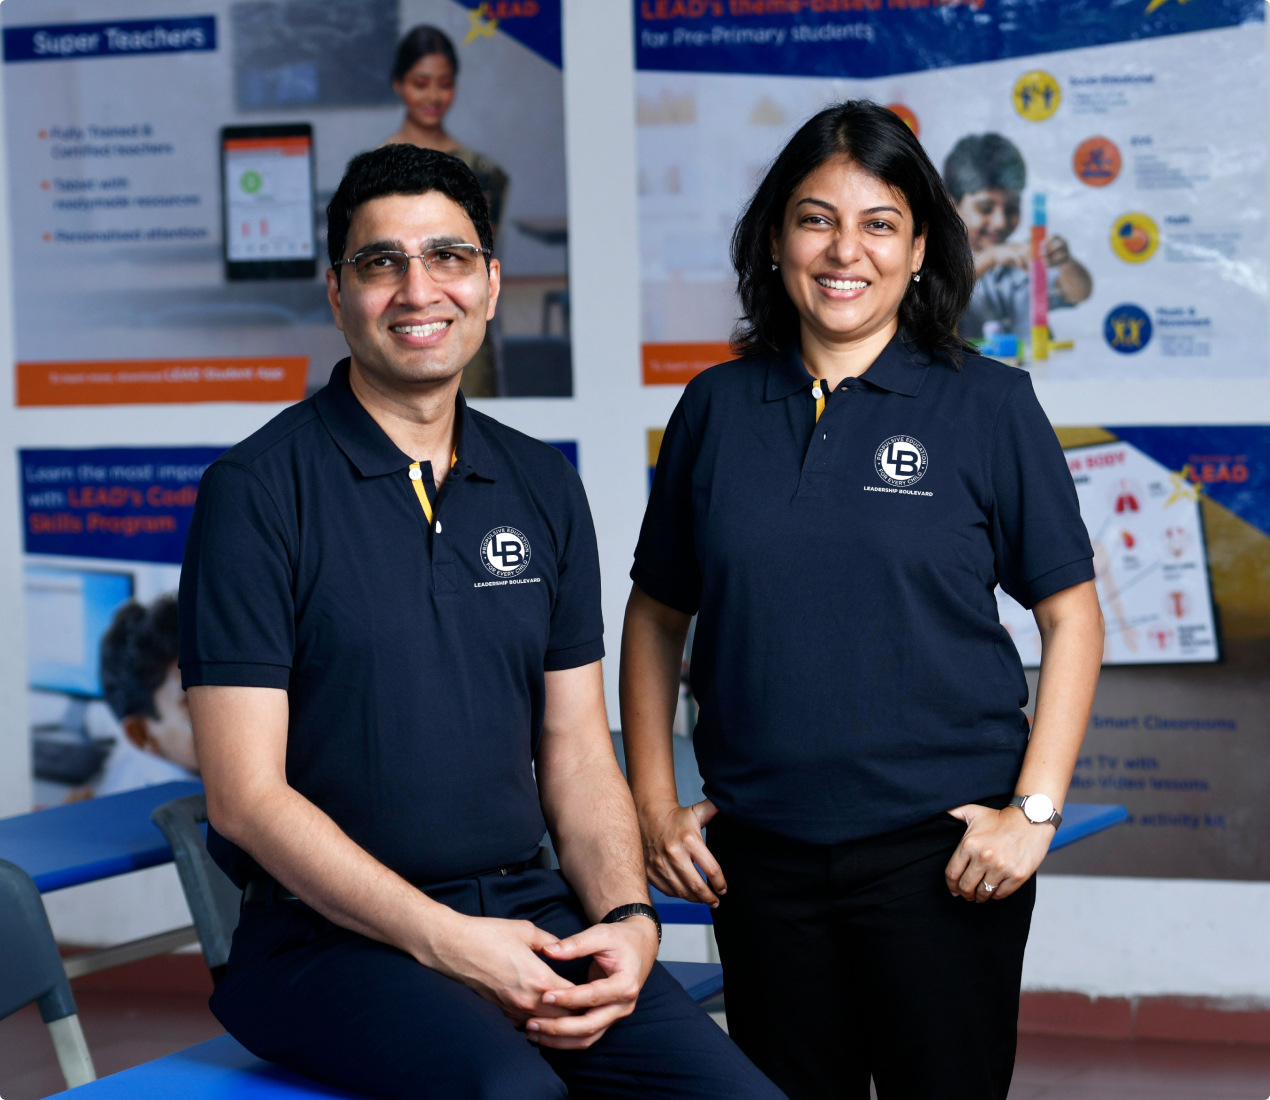 Leadership Boulevard is India’s largest & fastest-growing School EdTech company